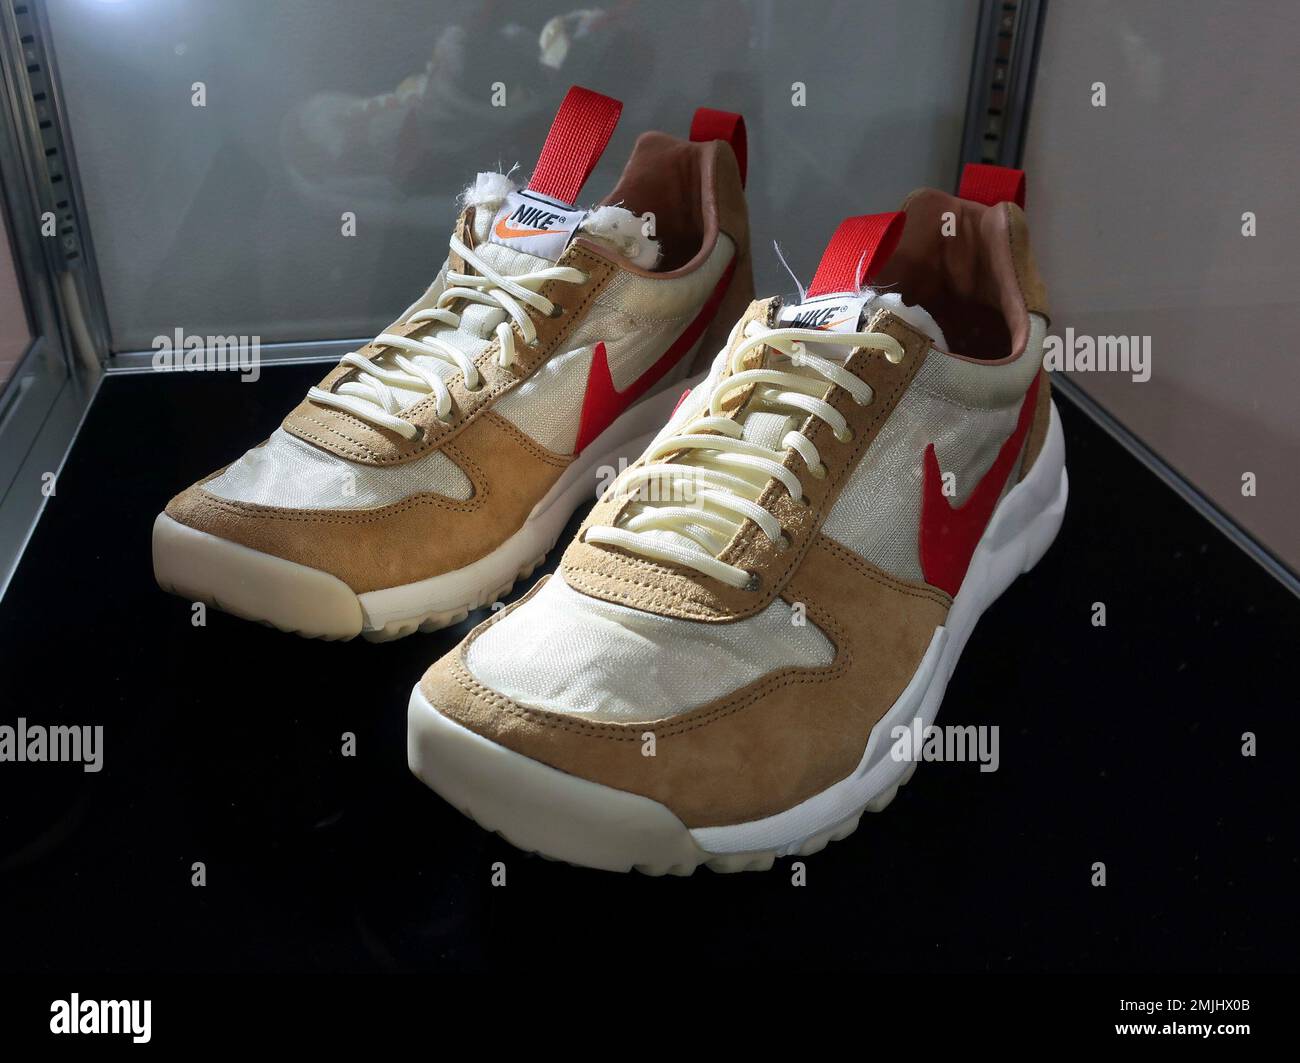 A pair of 2012 "Tom Sachs X Nikecraft Mars Yard" shoes are on display at  Sotheby's auction house in New York on July 12, 2019. Sotheby's expects two  pairs of the shoes